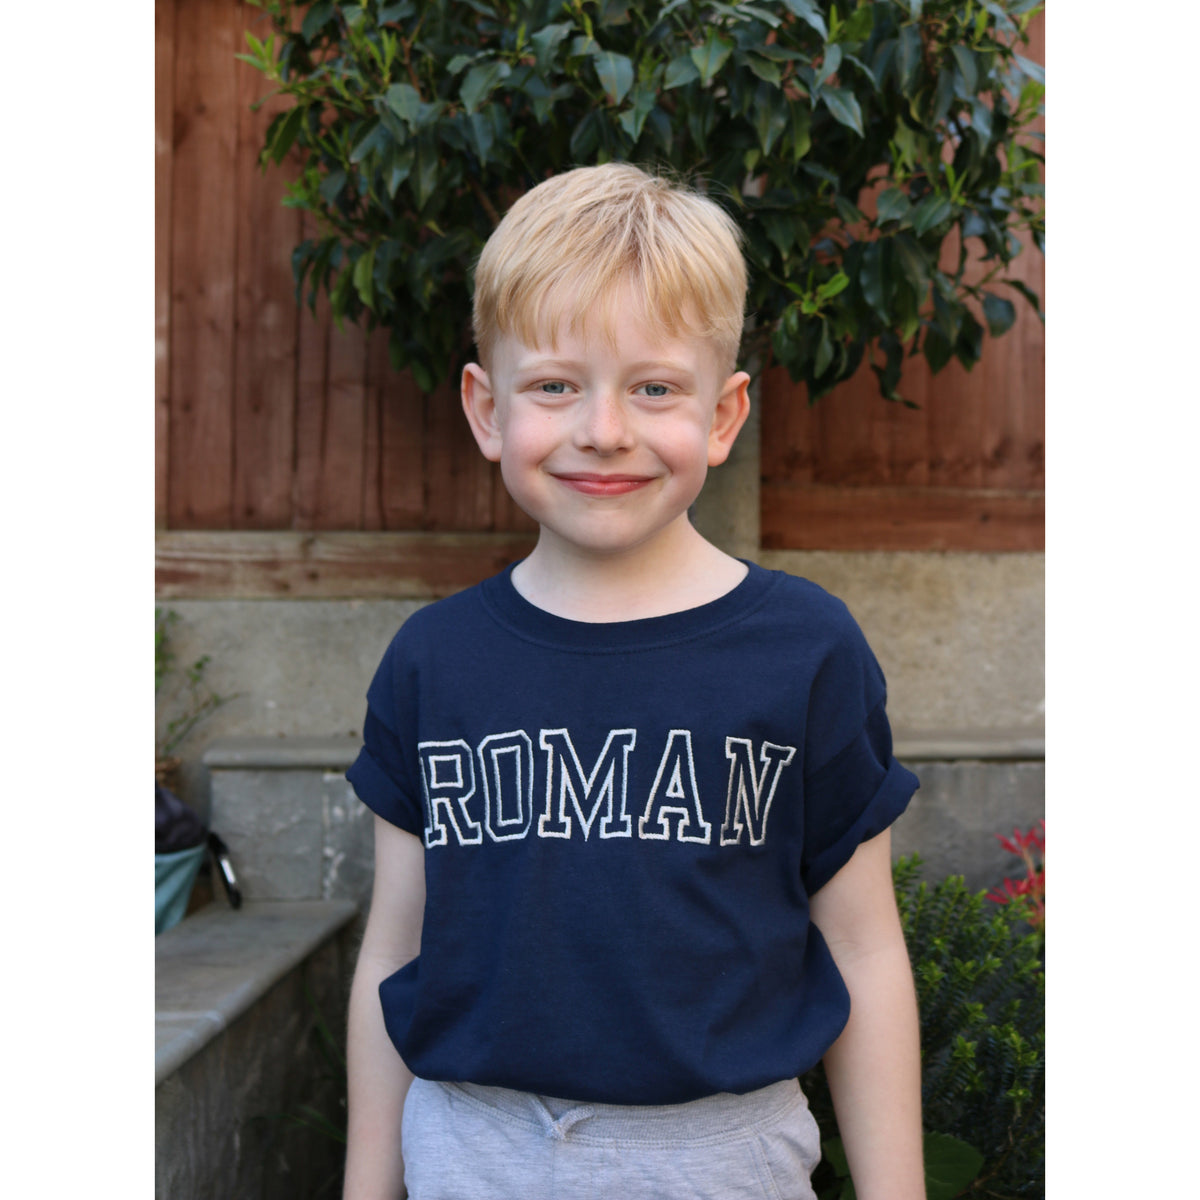 Kids t-shirt personalised text